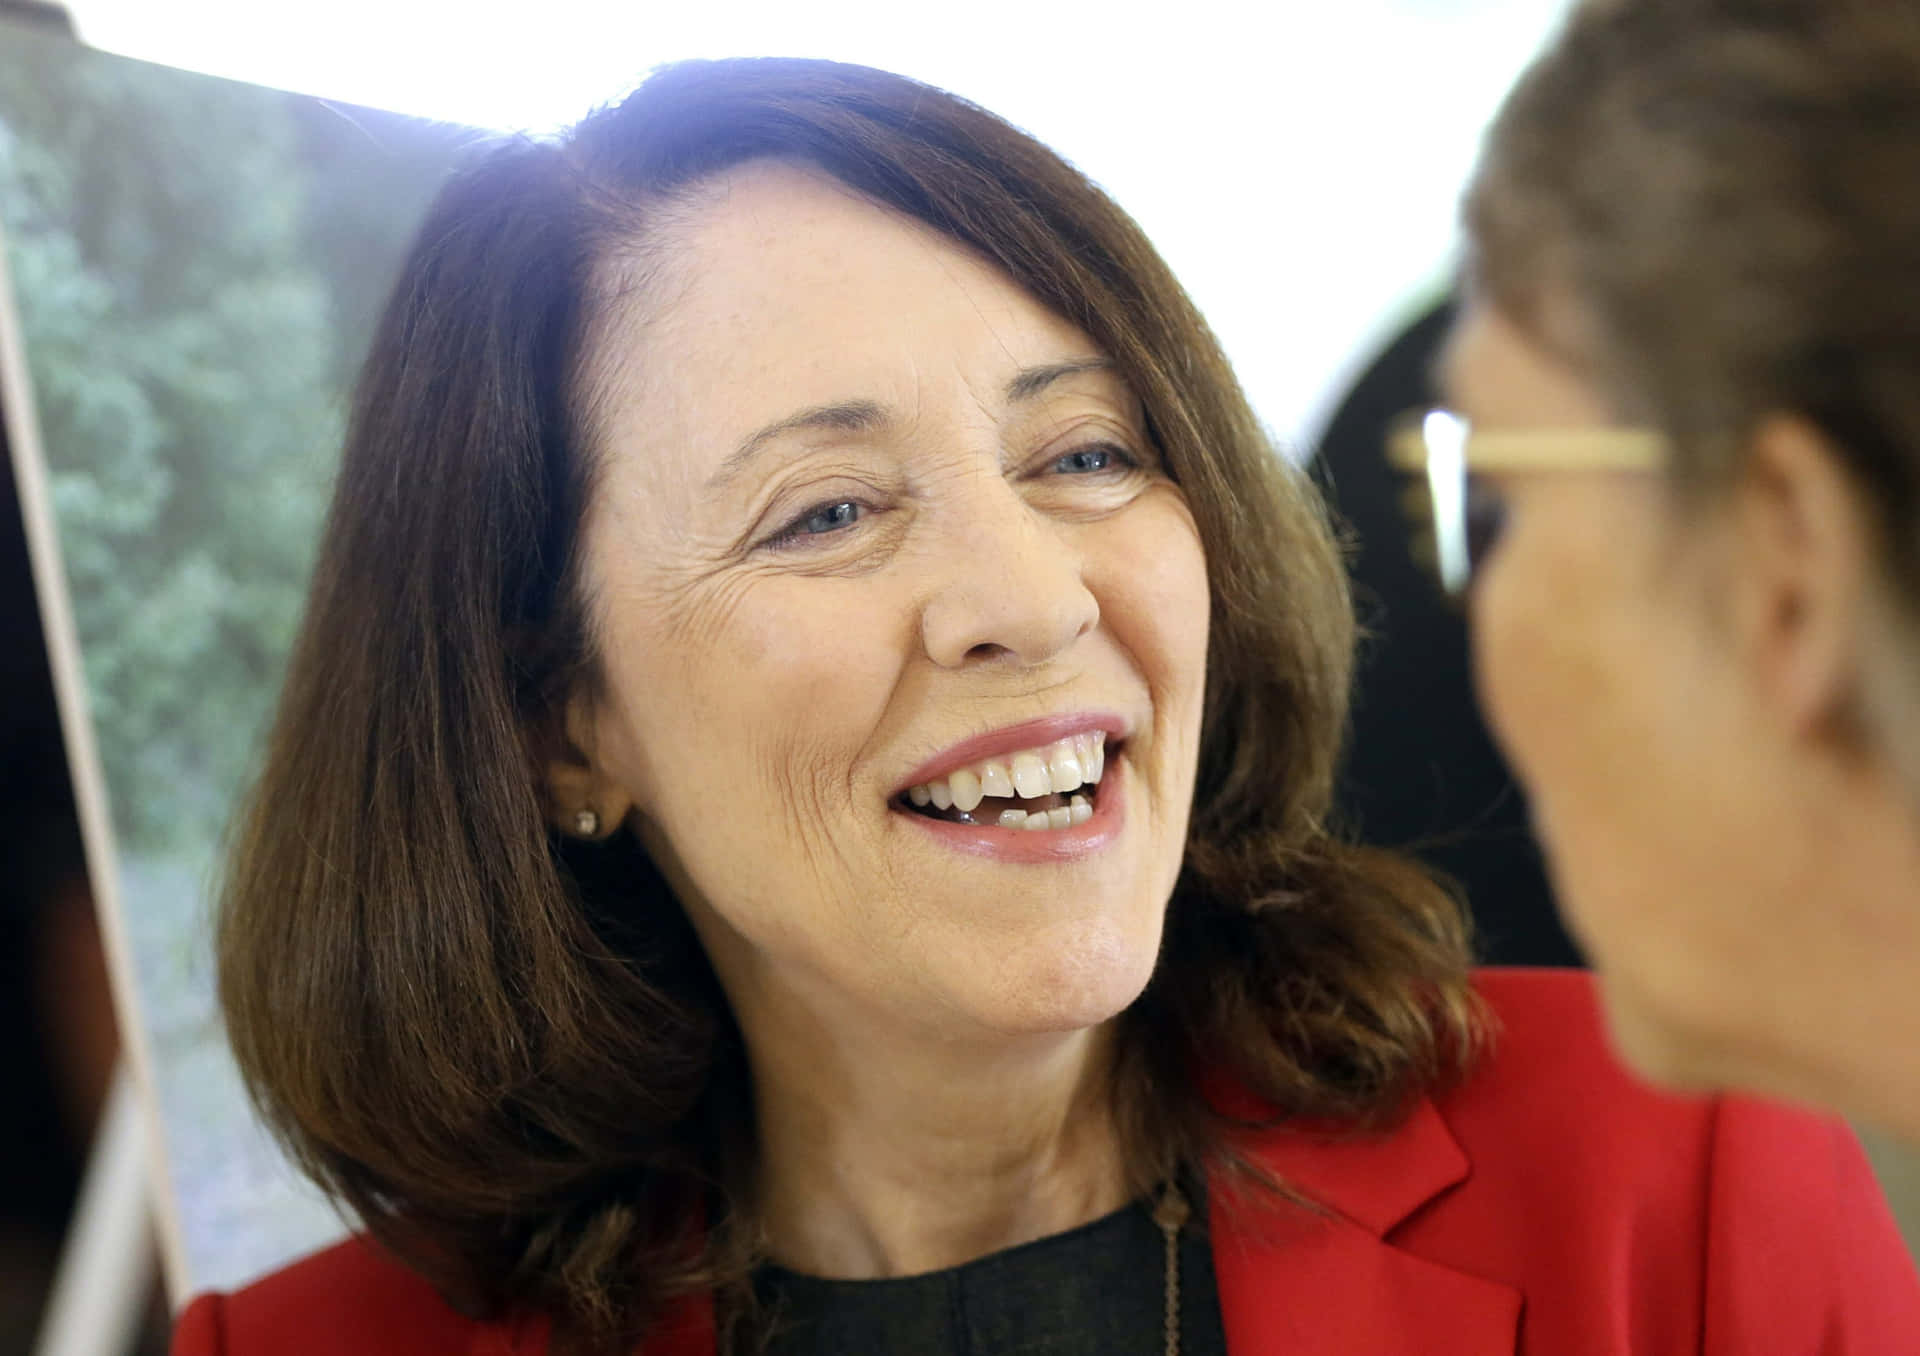 Maria Cantwell Smiling Happily Wallpaper